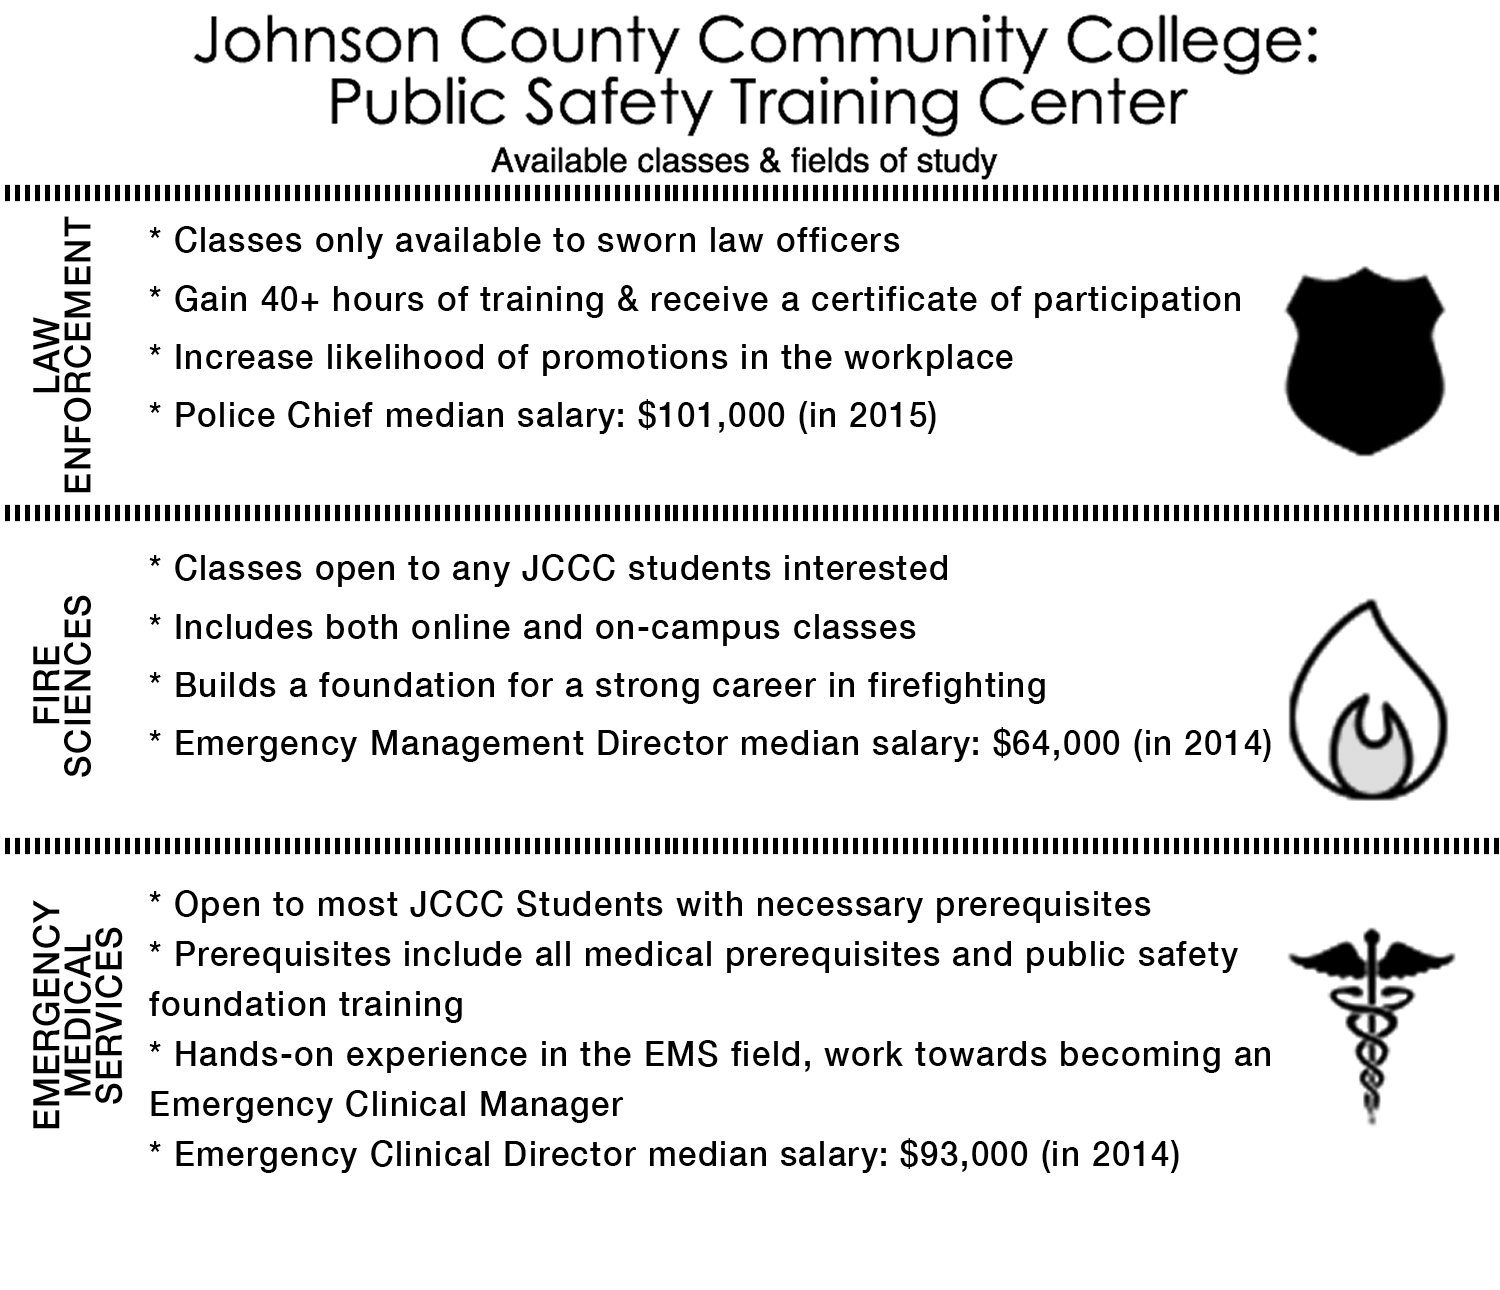 JCCC offers public safety courses